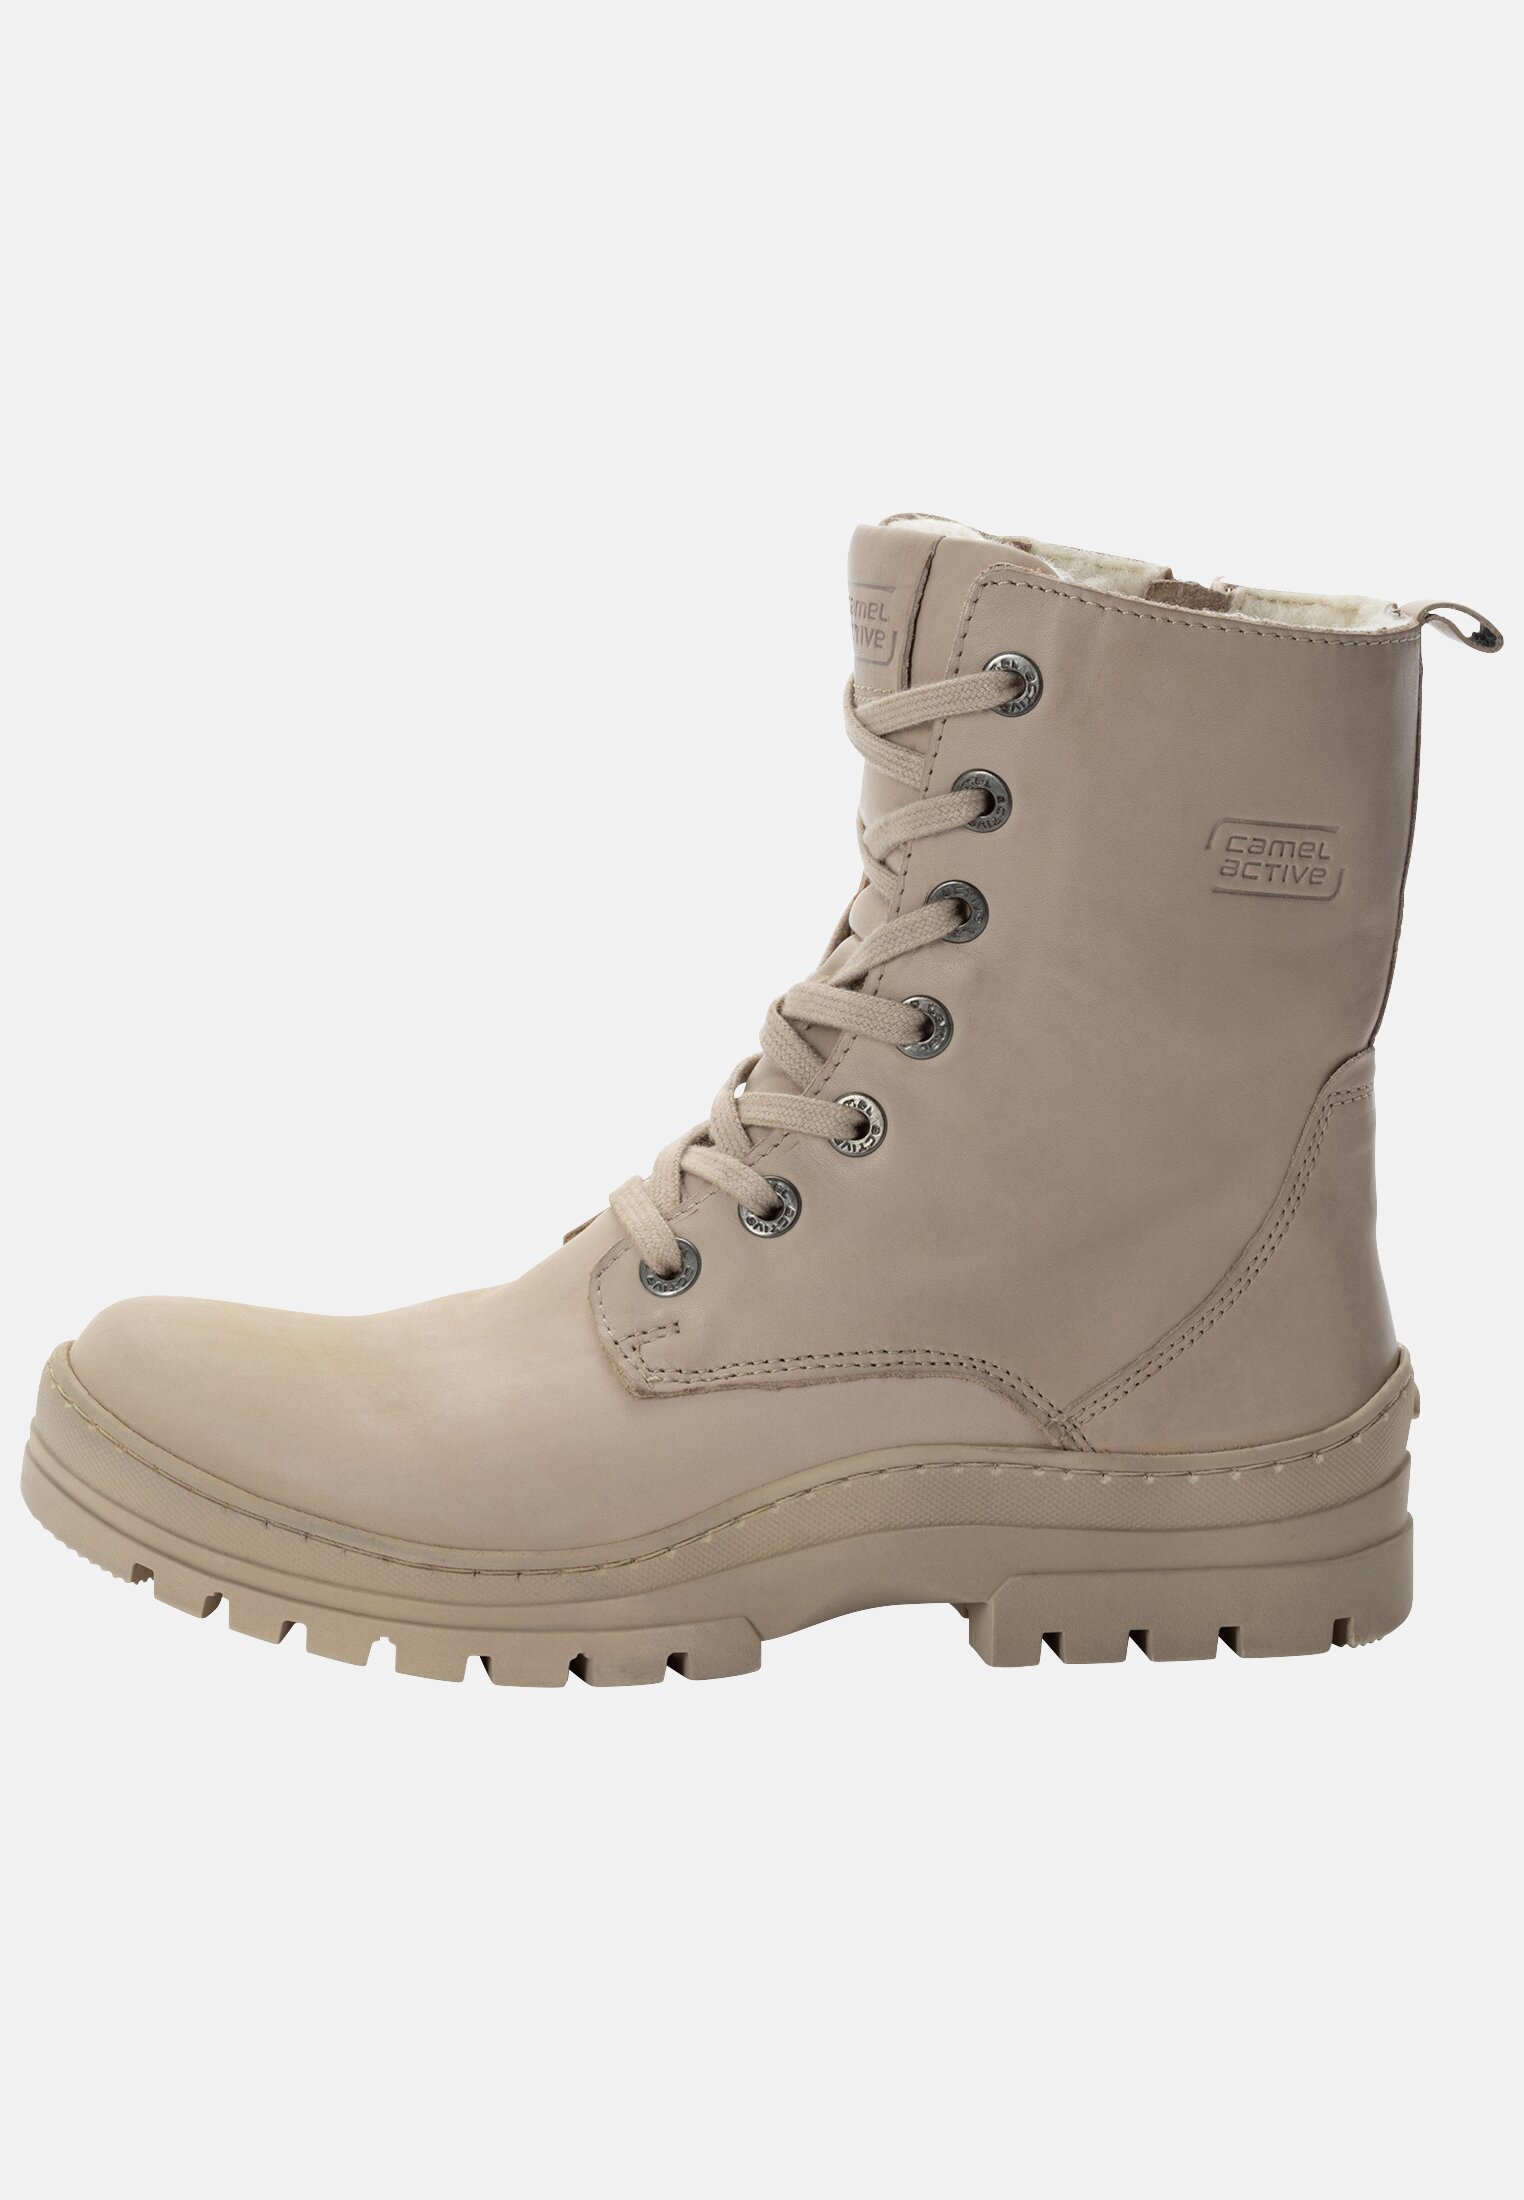 Camel Active Lace-up boot made from cowhide